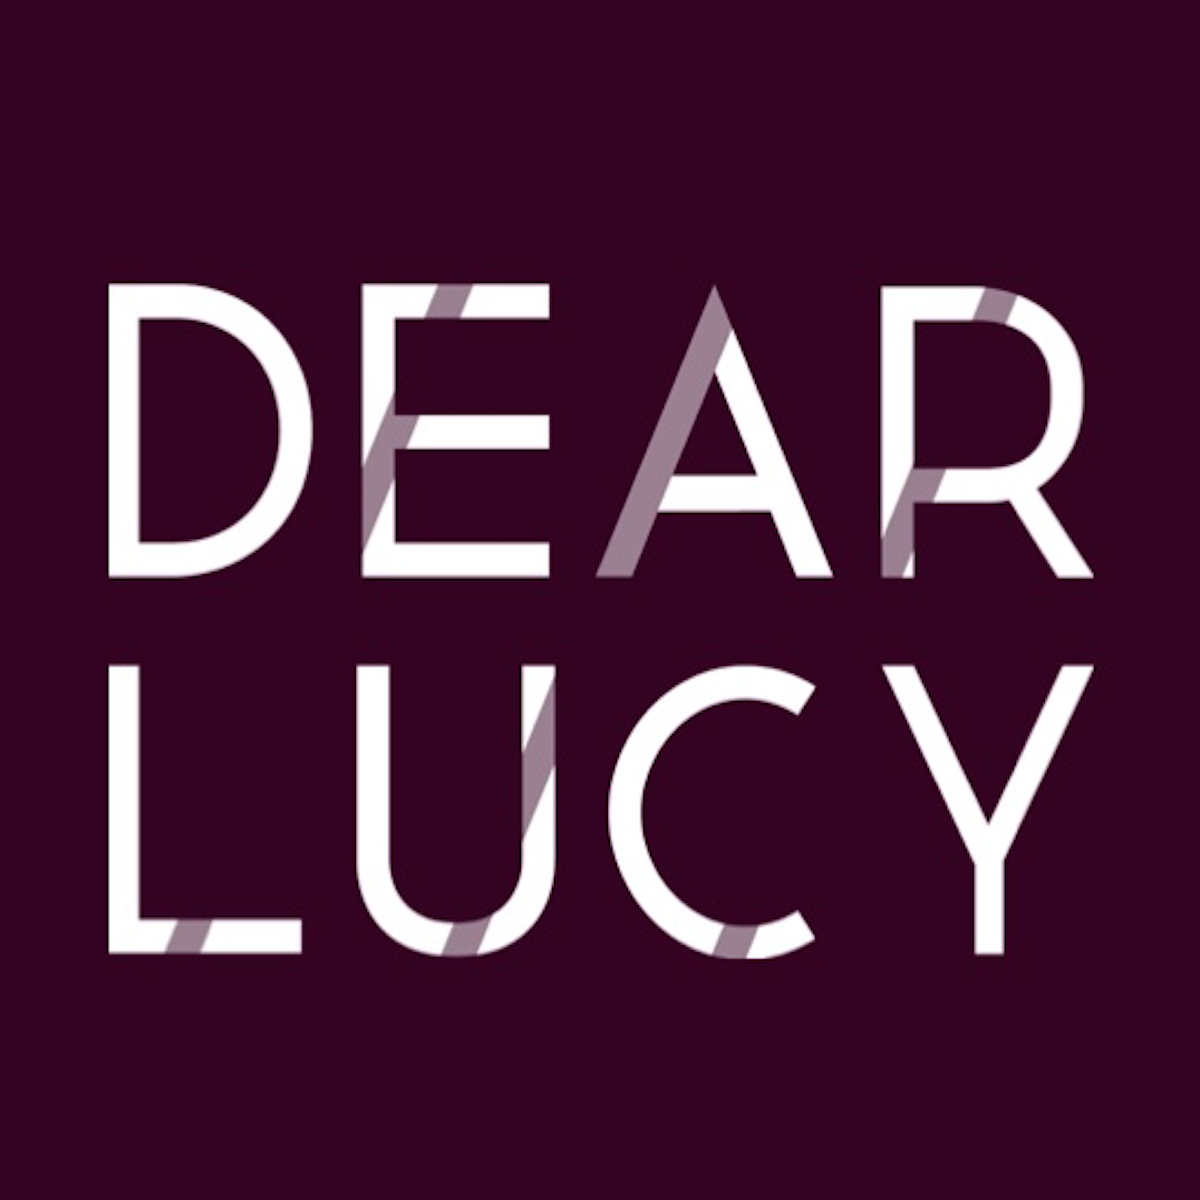 Lucy cloud. Dear Lucy. Dear Lucy my name is Michelle and i.